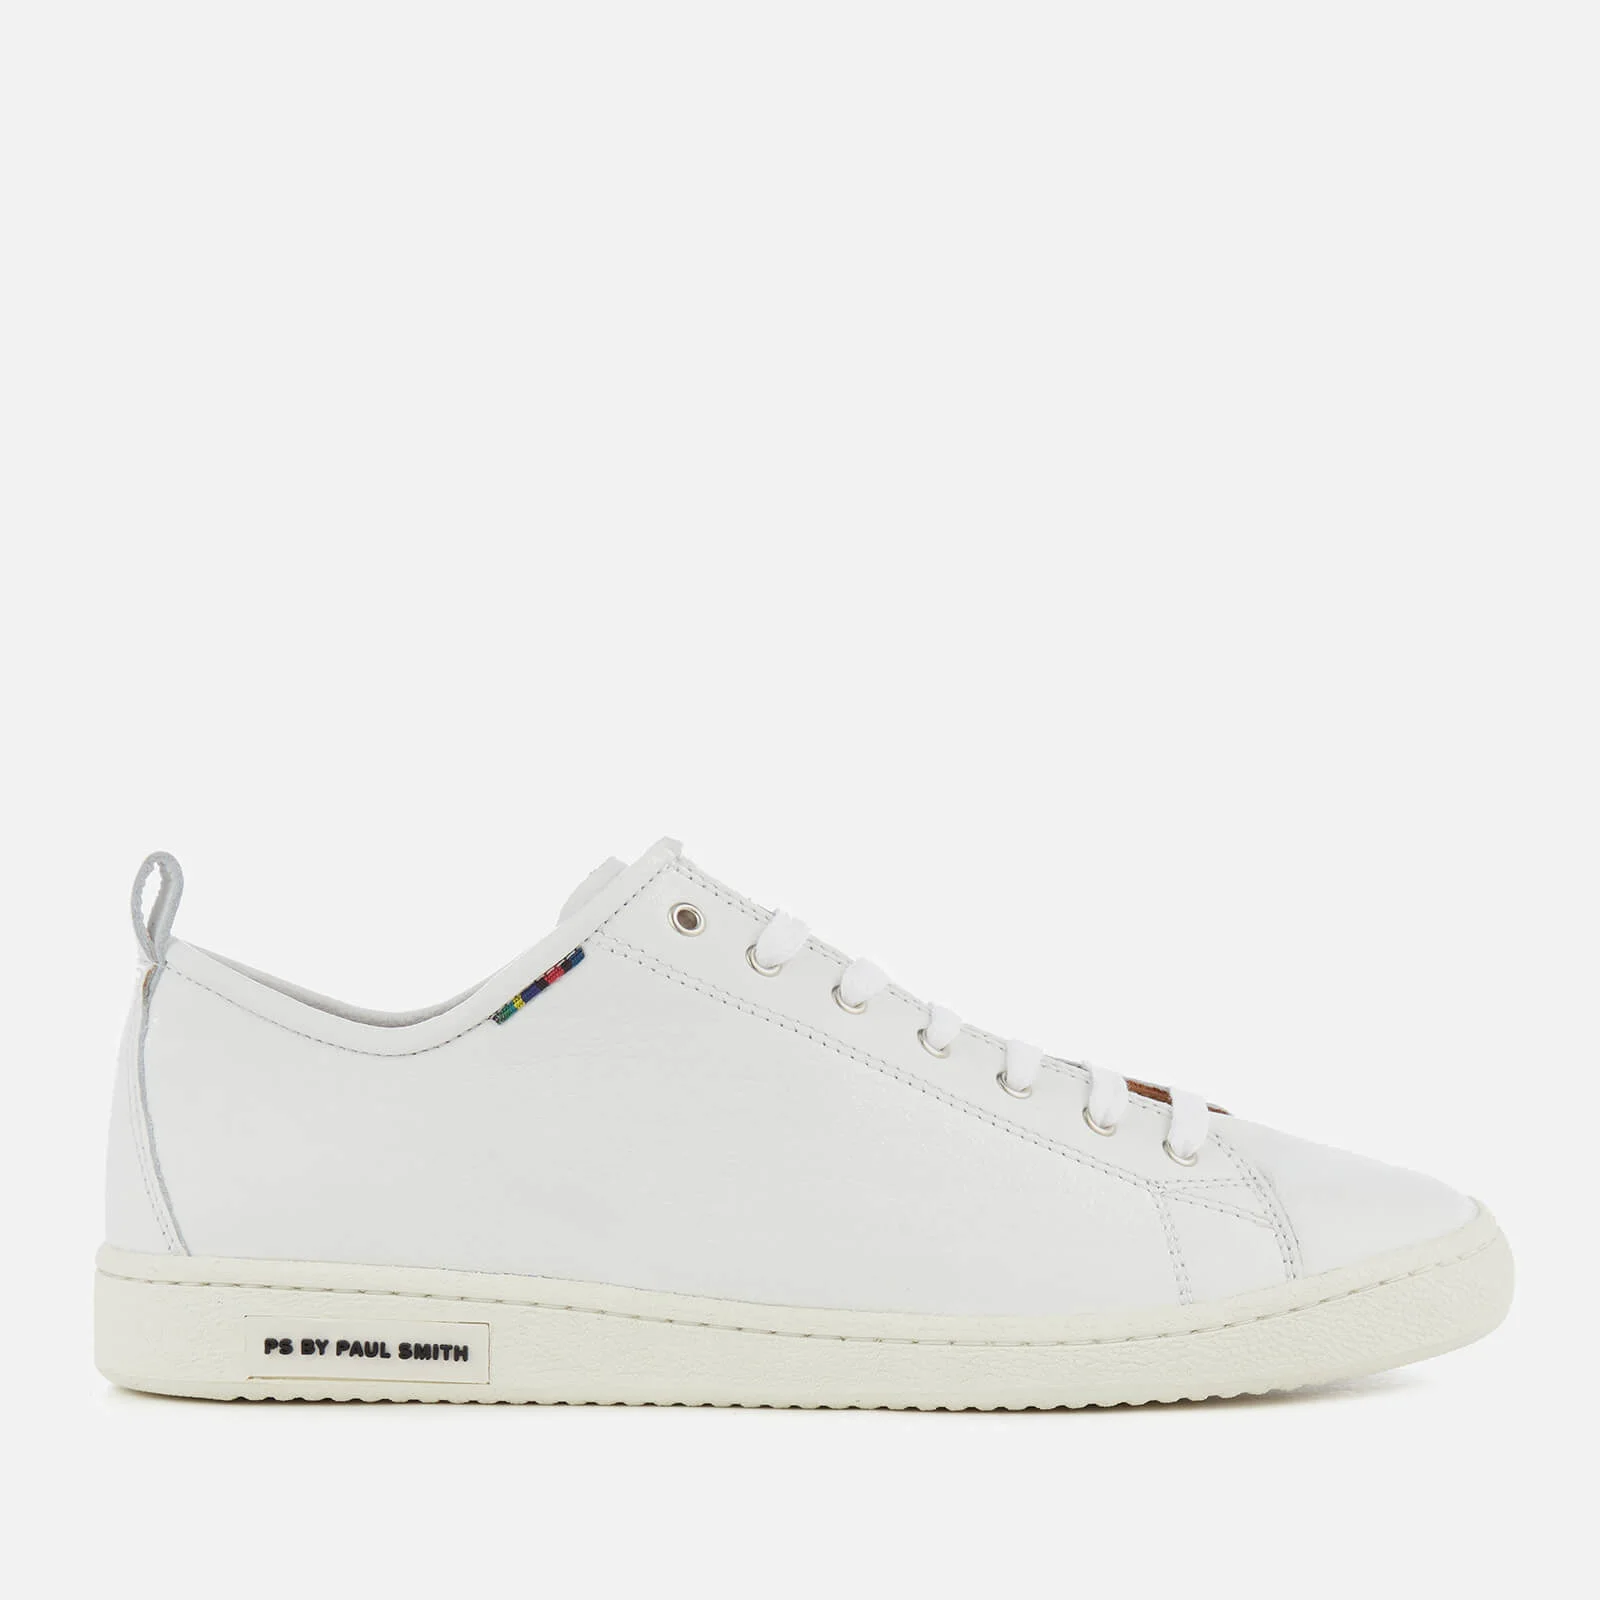 PS by Paul Smith Men's Miyata Leather Trainers - White Image 1